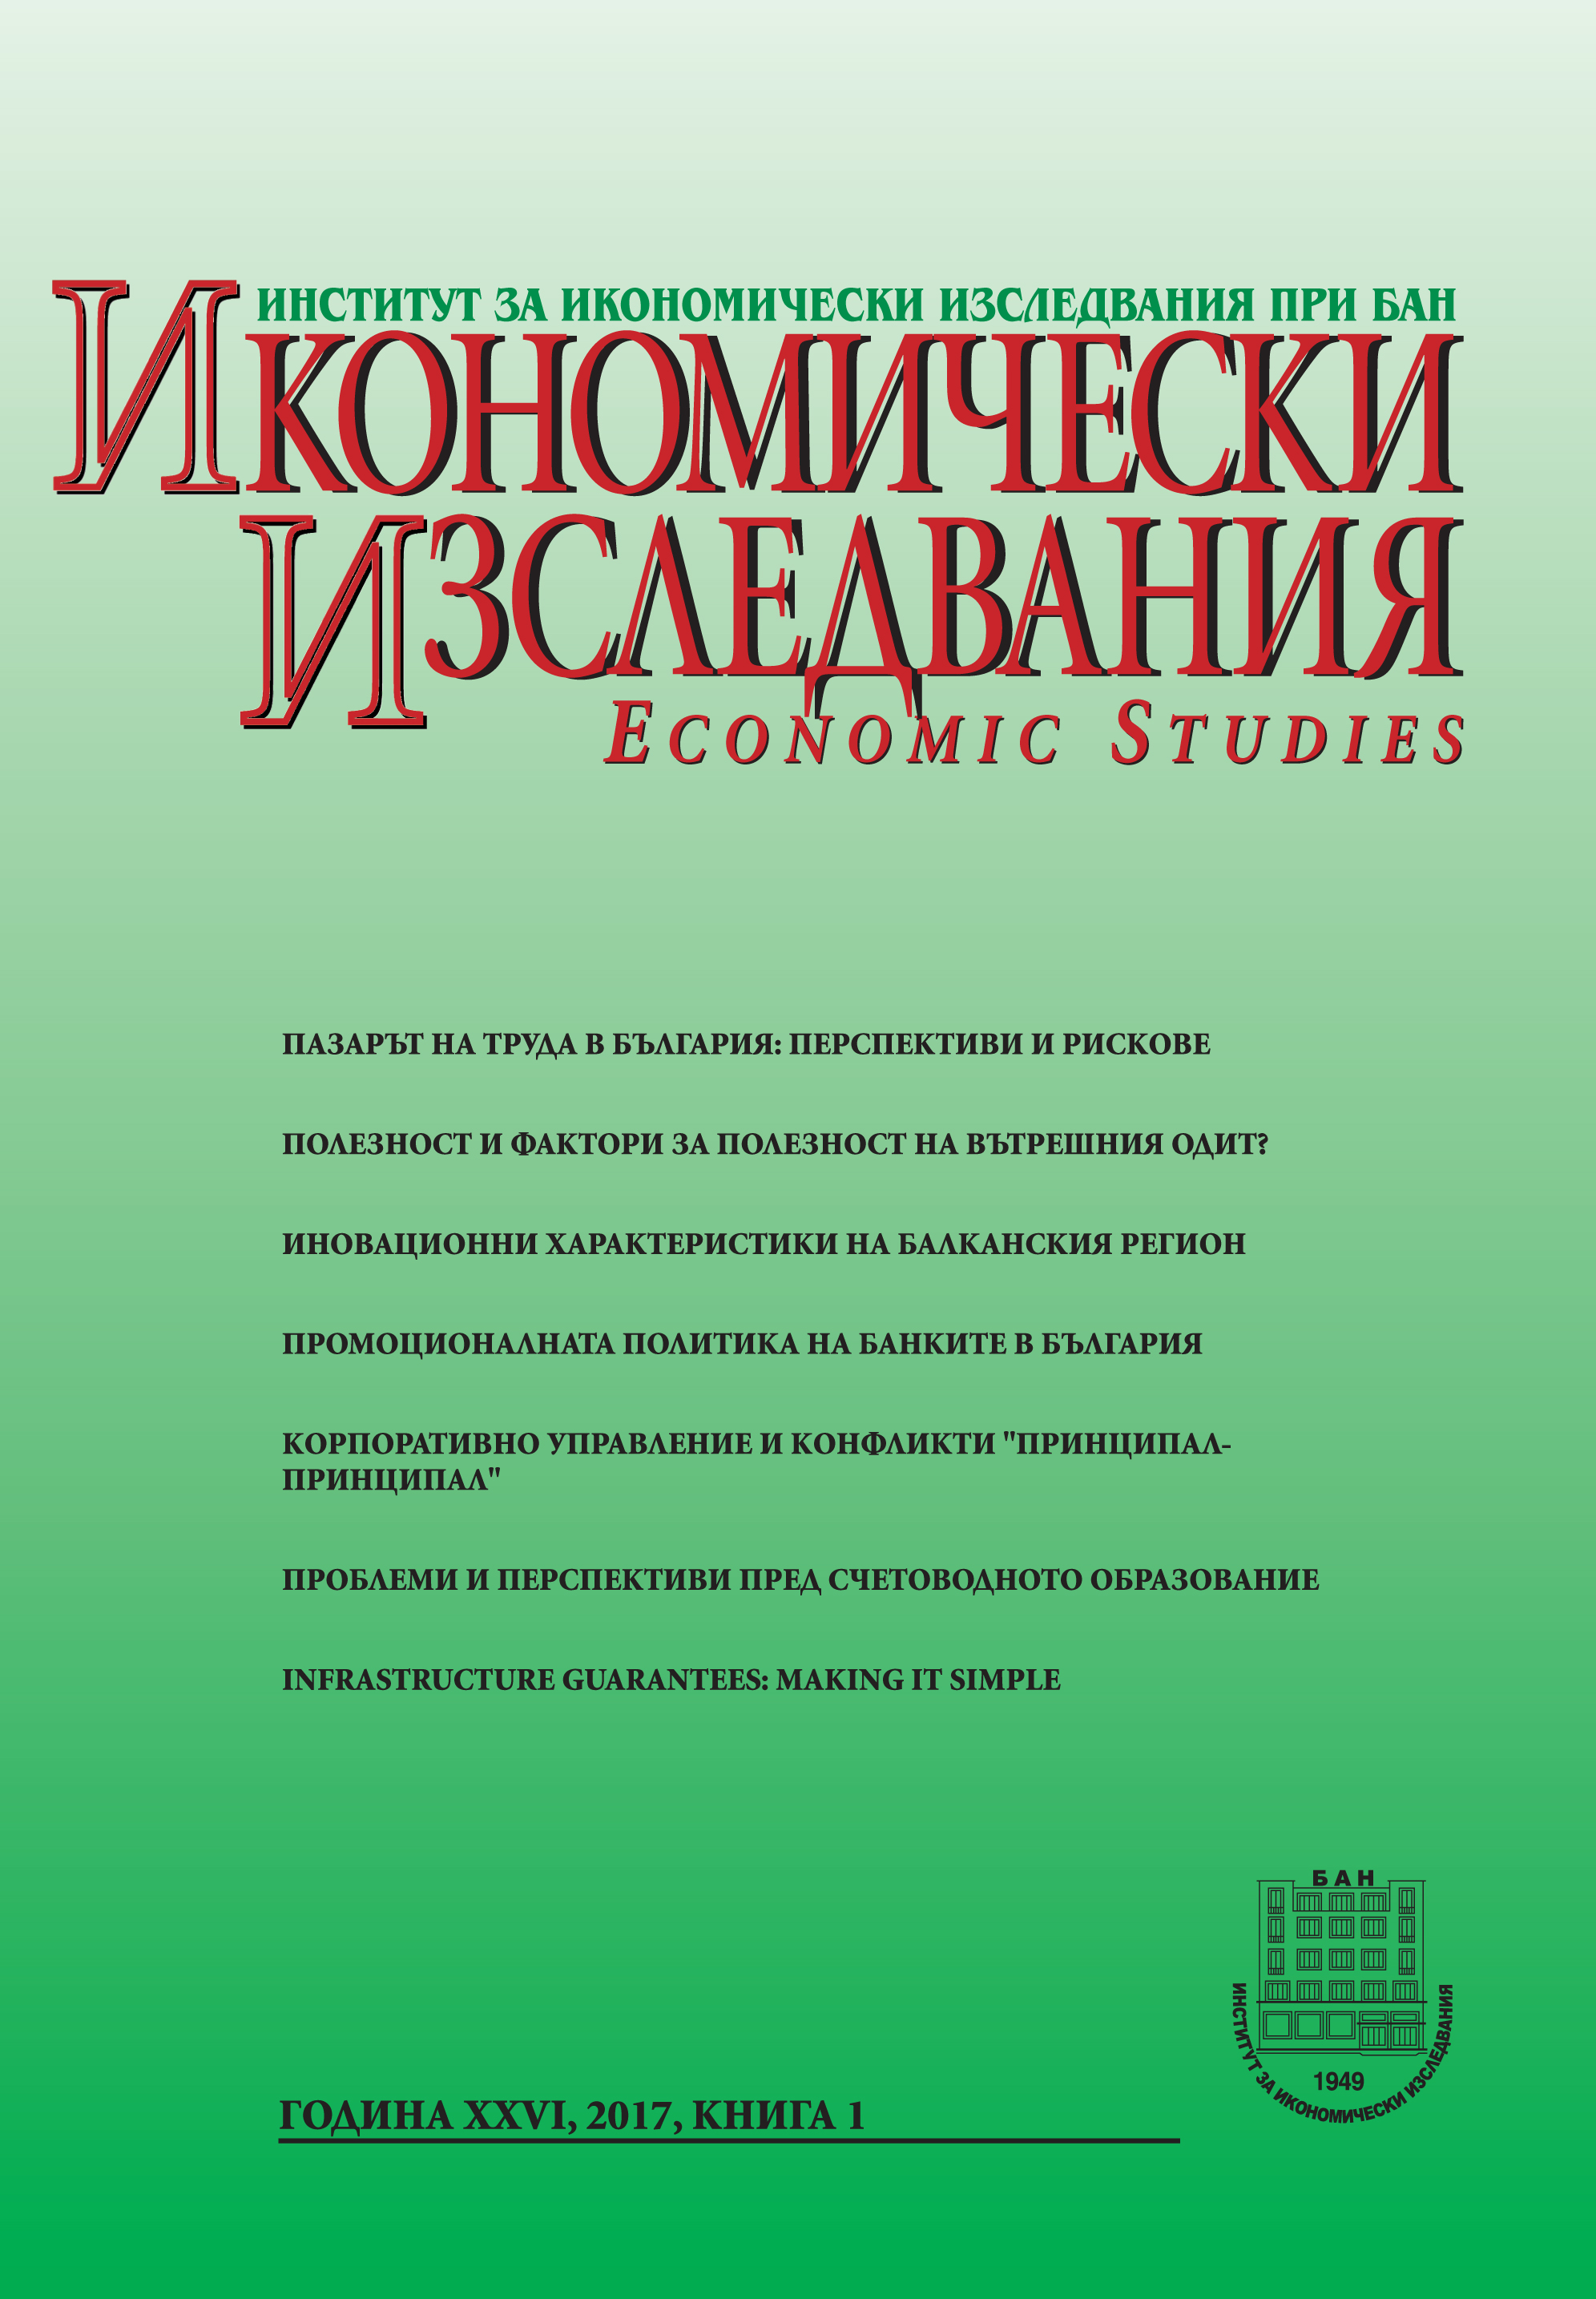 Development of the Promotion Policy of the Bulgarian Banks Cover Image